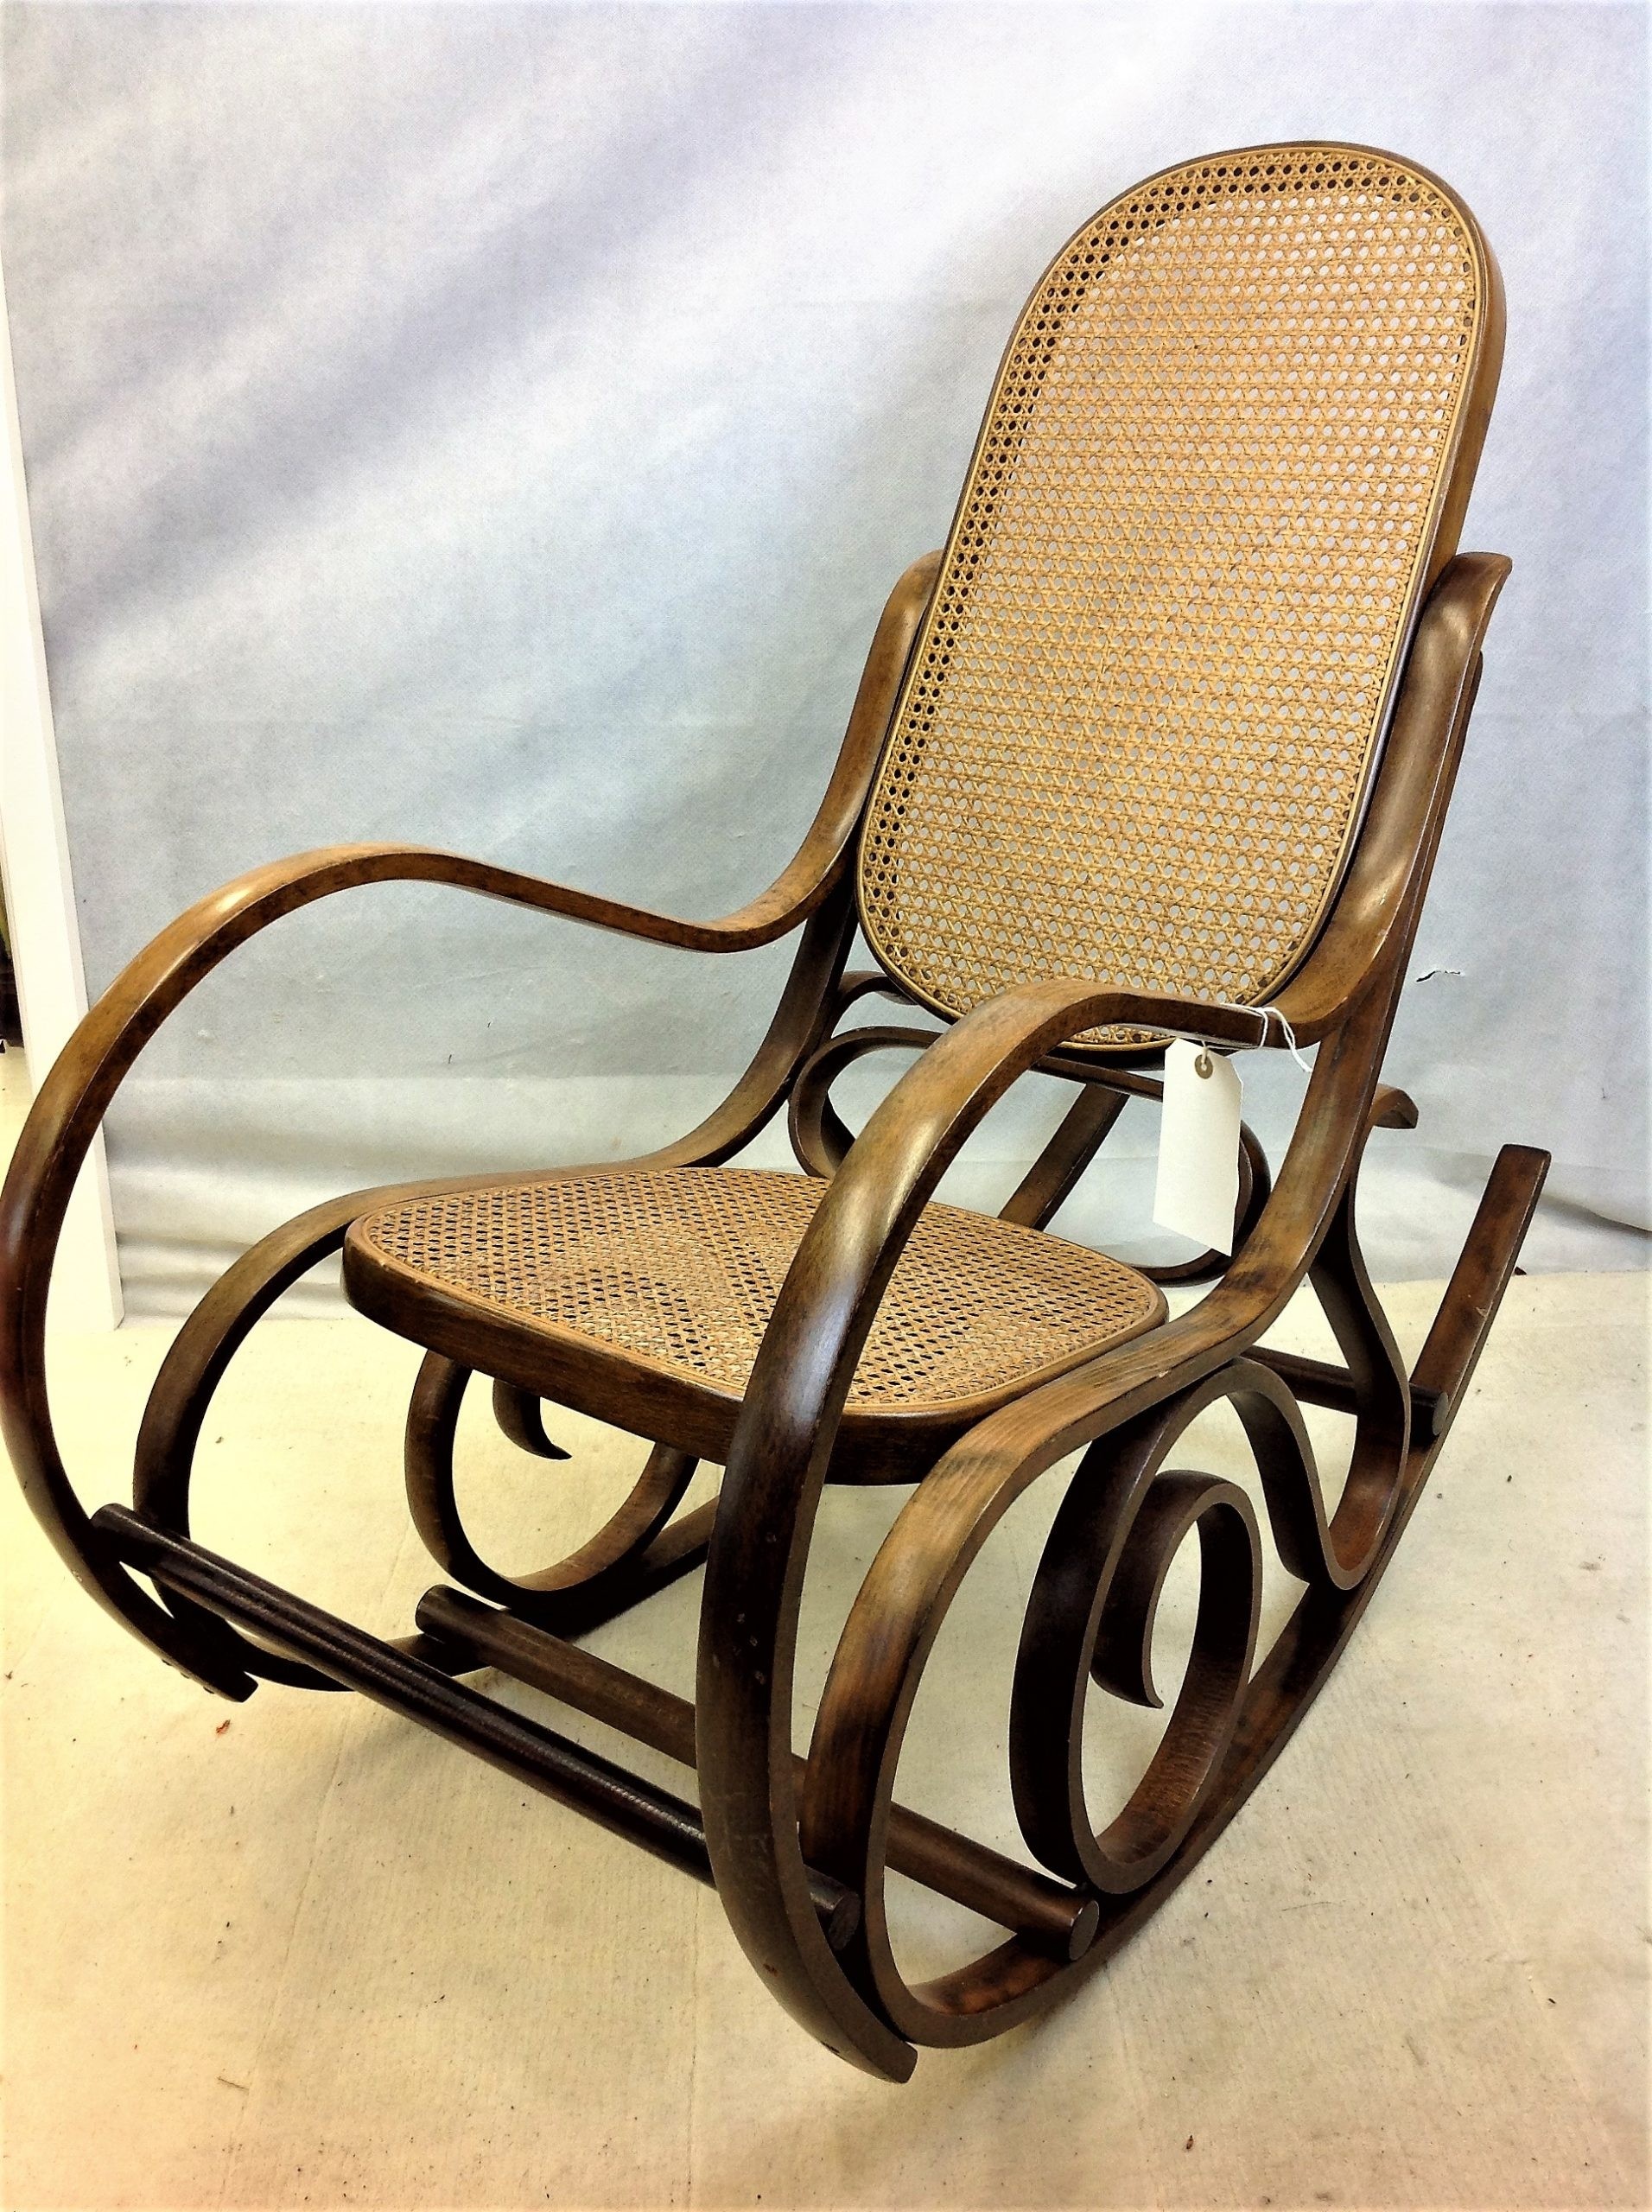 Thonet style bentwood rocking chair on the square emporium